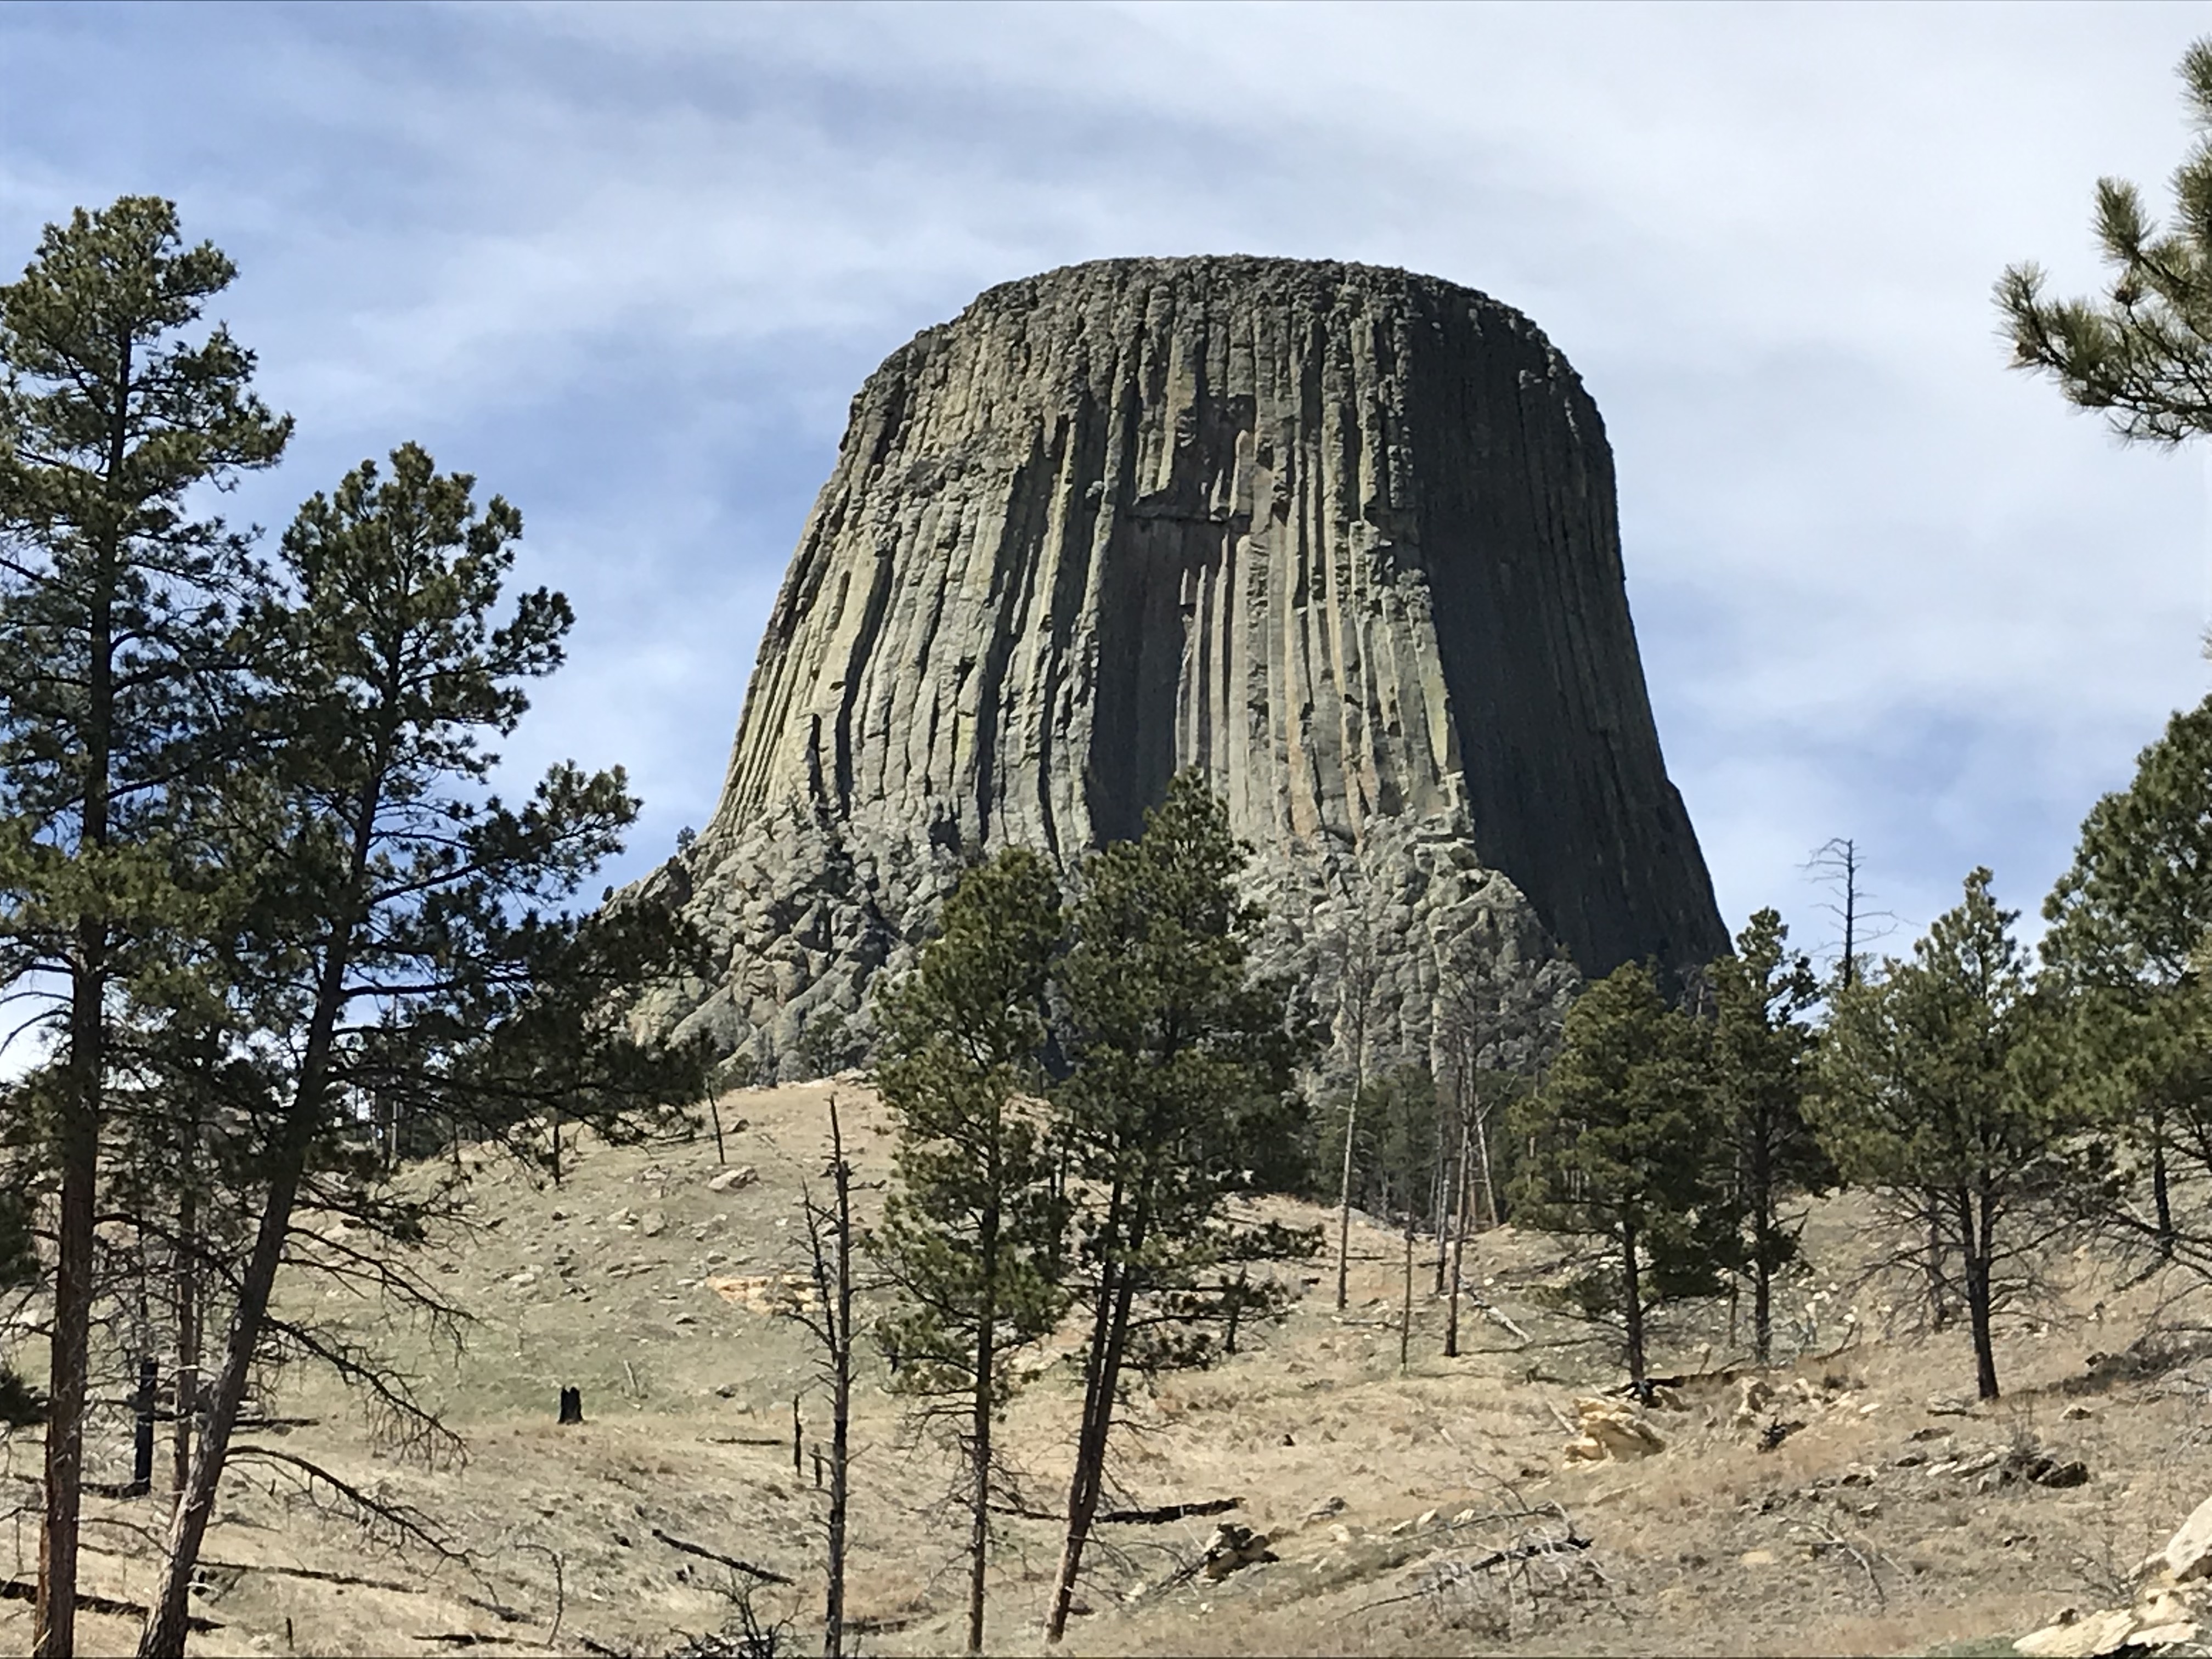 View from the bottom of a brown-grass and sparse, pine tree-covered hill. A tall, rock monolith rises from behind the crest of the hill. 